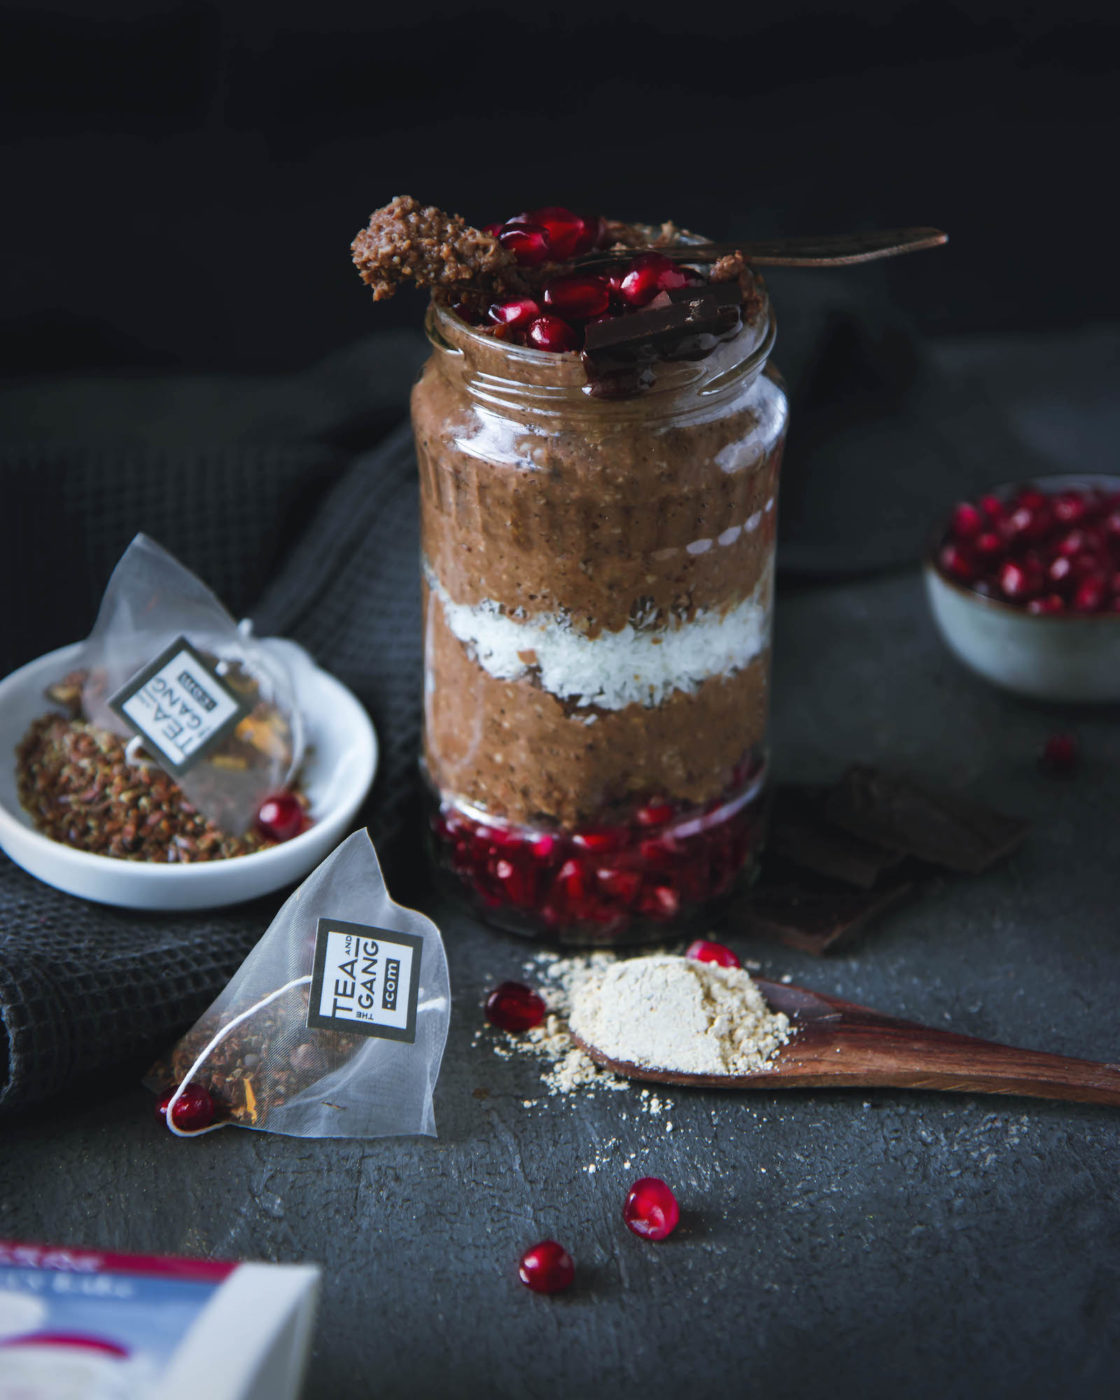 Spiced Gingerbread infused oats